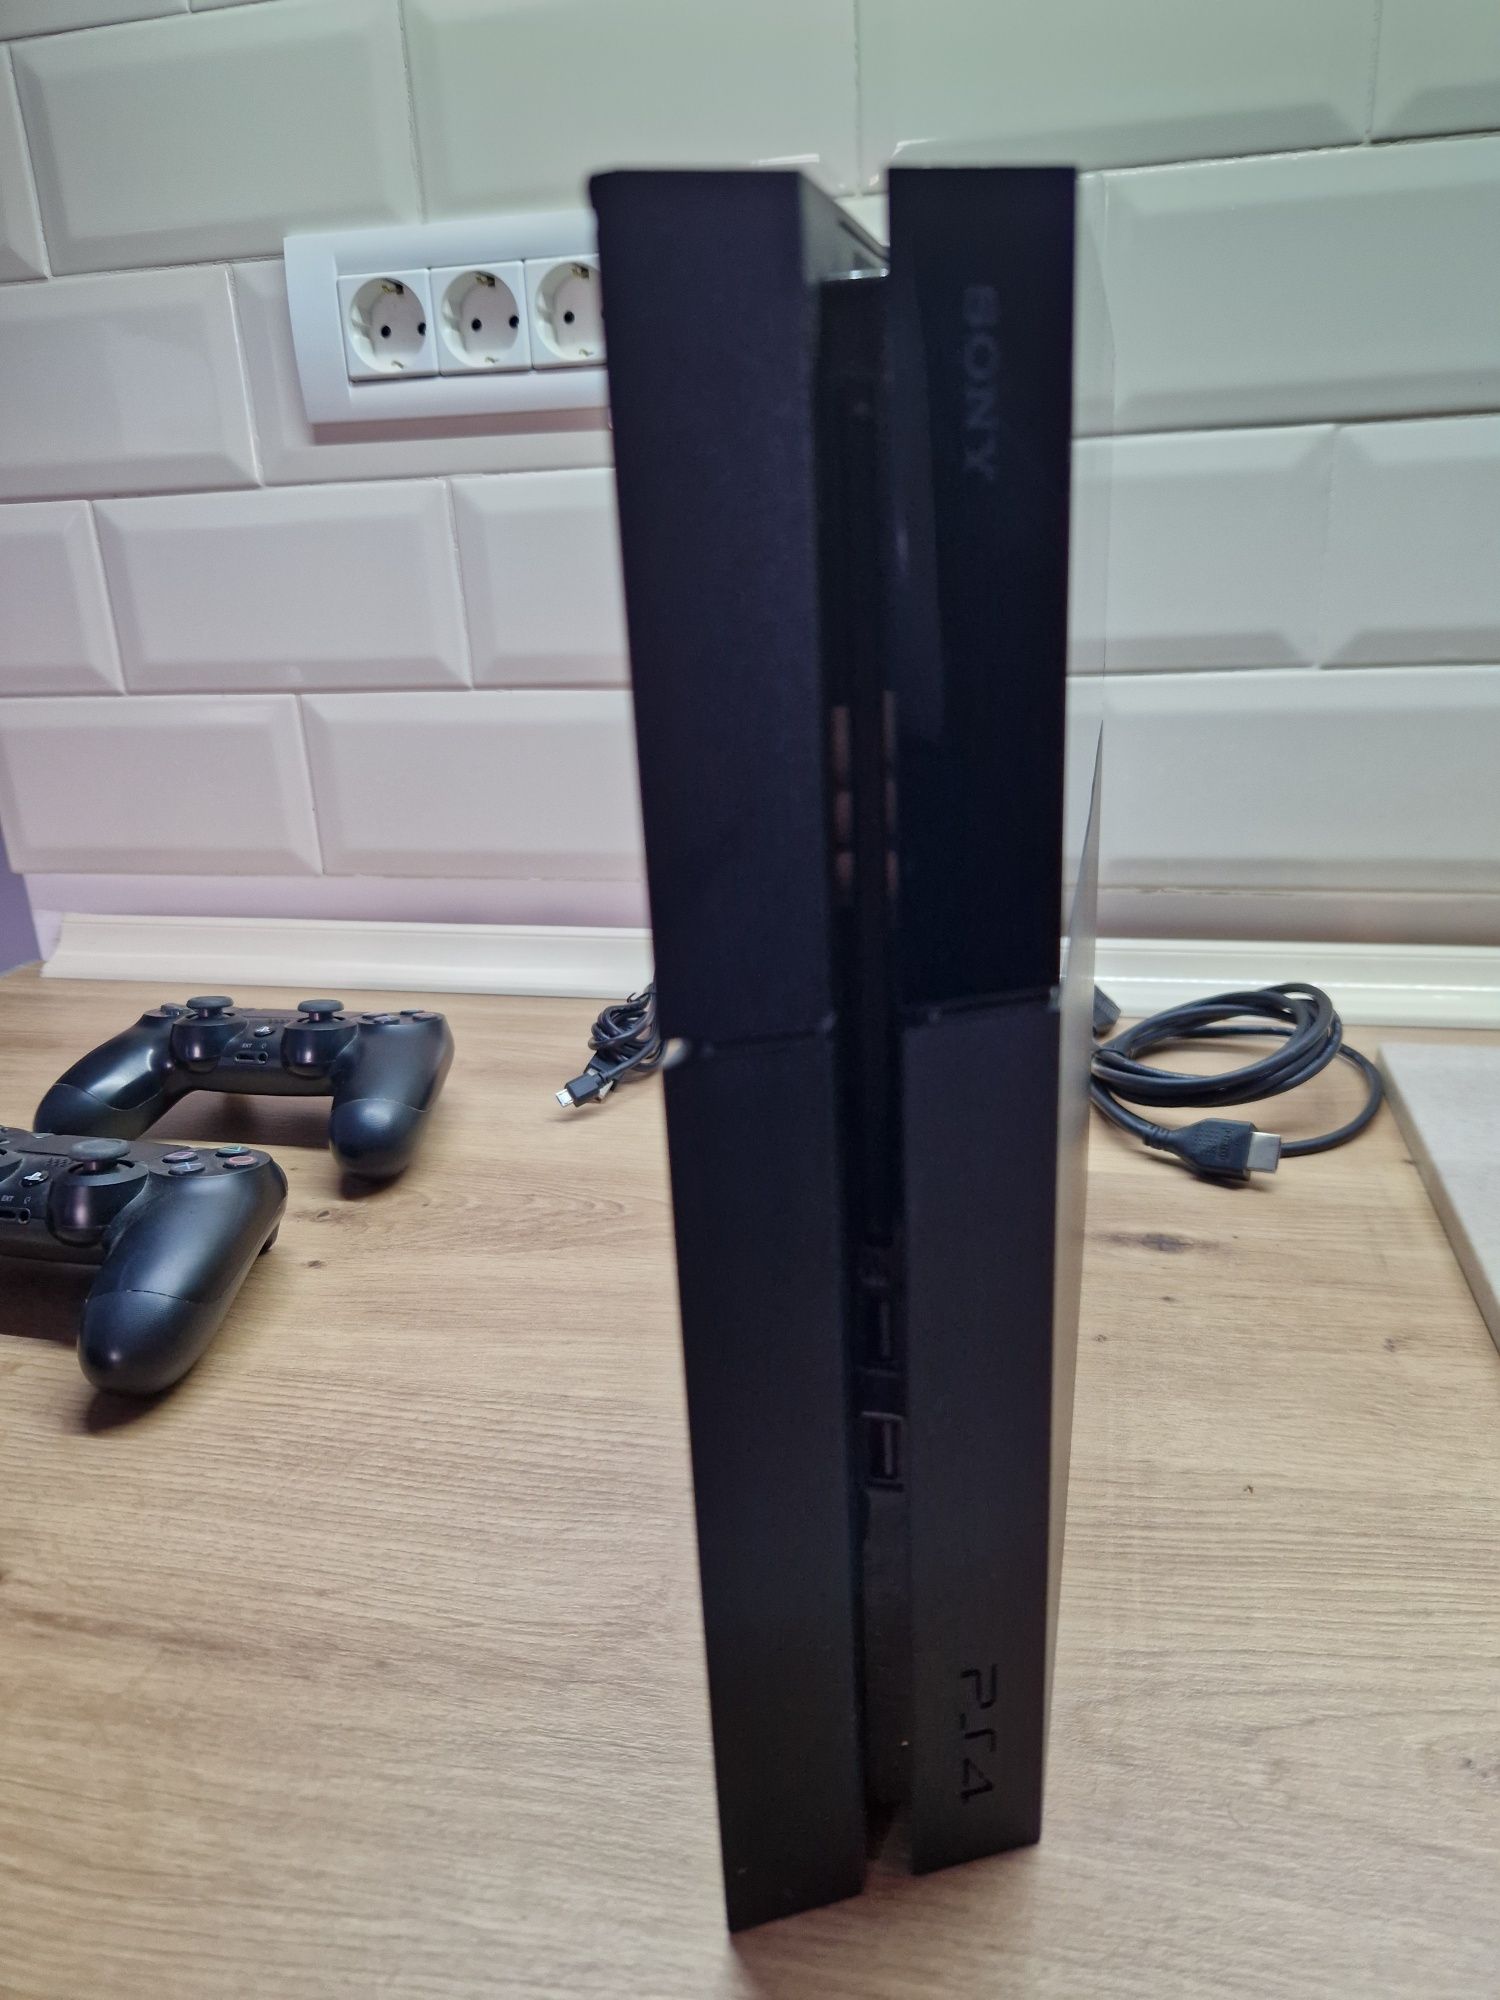 Vand PS4/Playstation 4 slim 1TB+ 2 console.Poze reale!